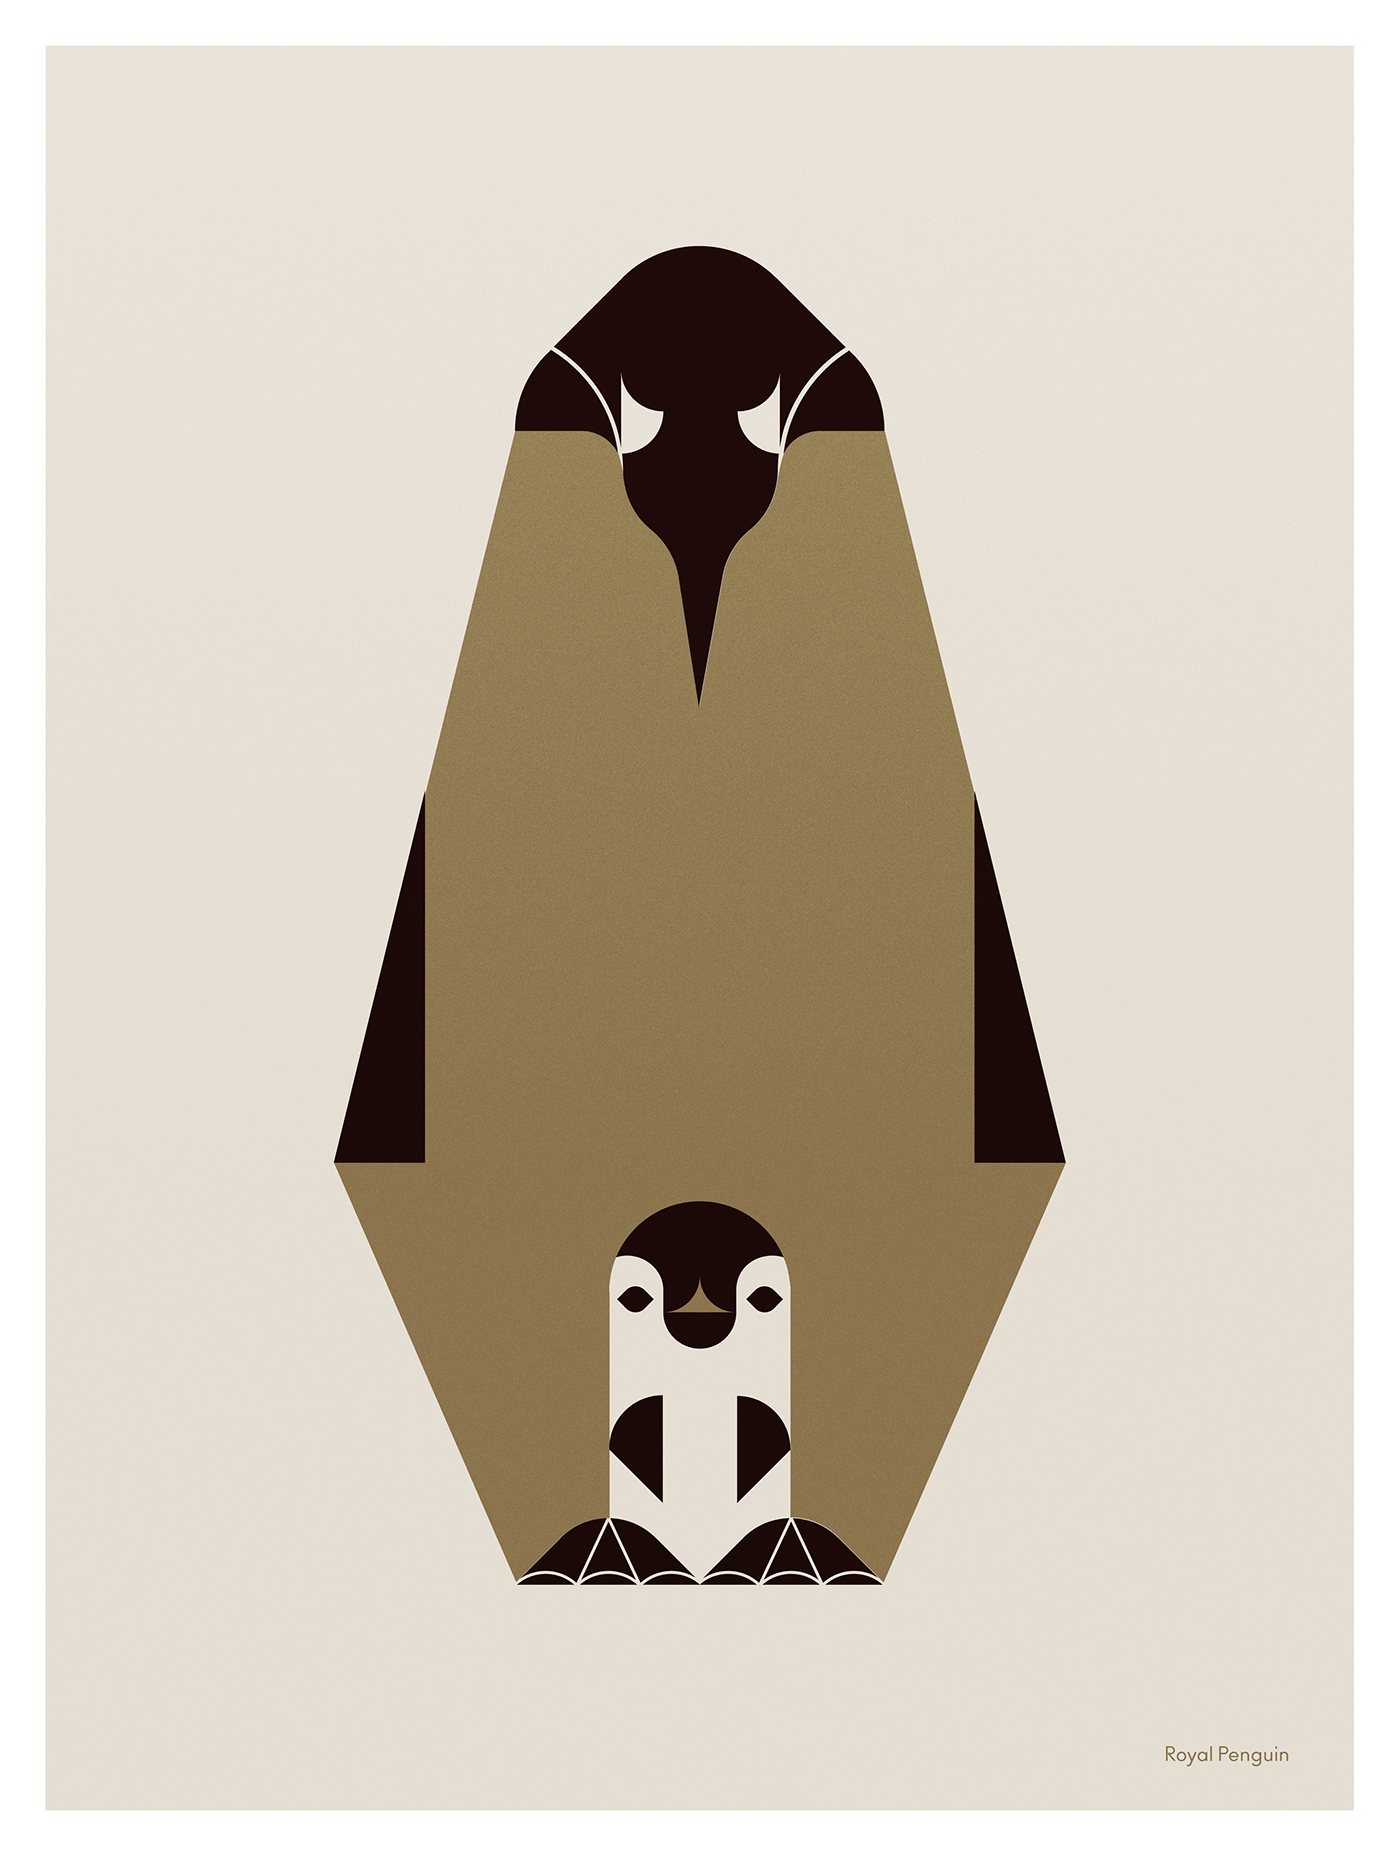 Geometric animals, poster series from Studio Soleil, that created for a various of projects. Penguin